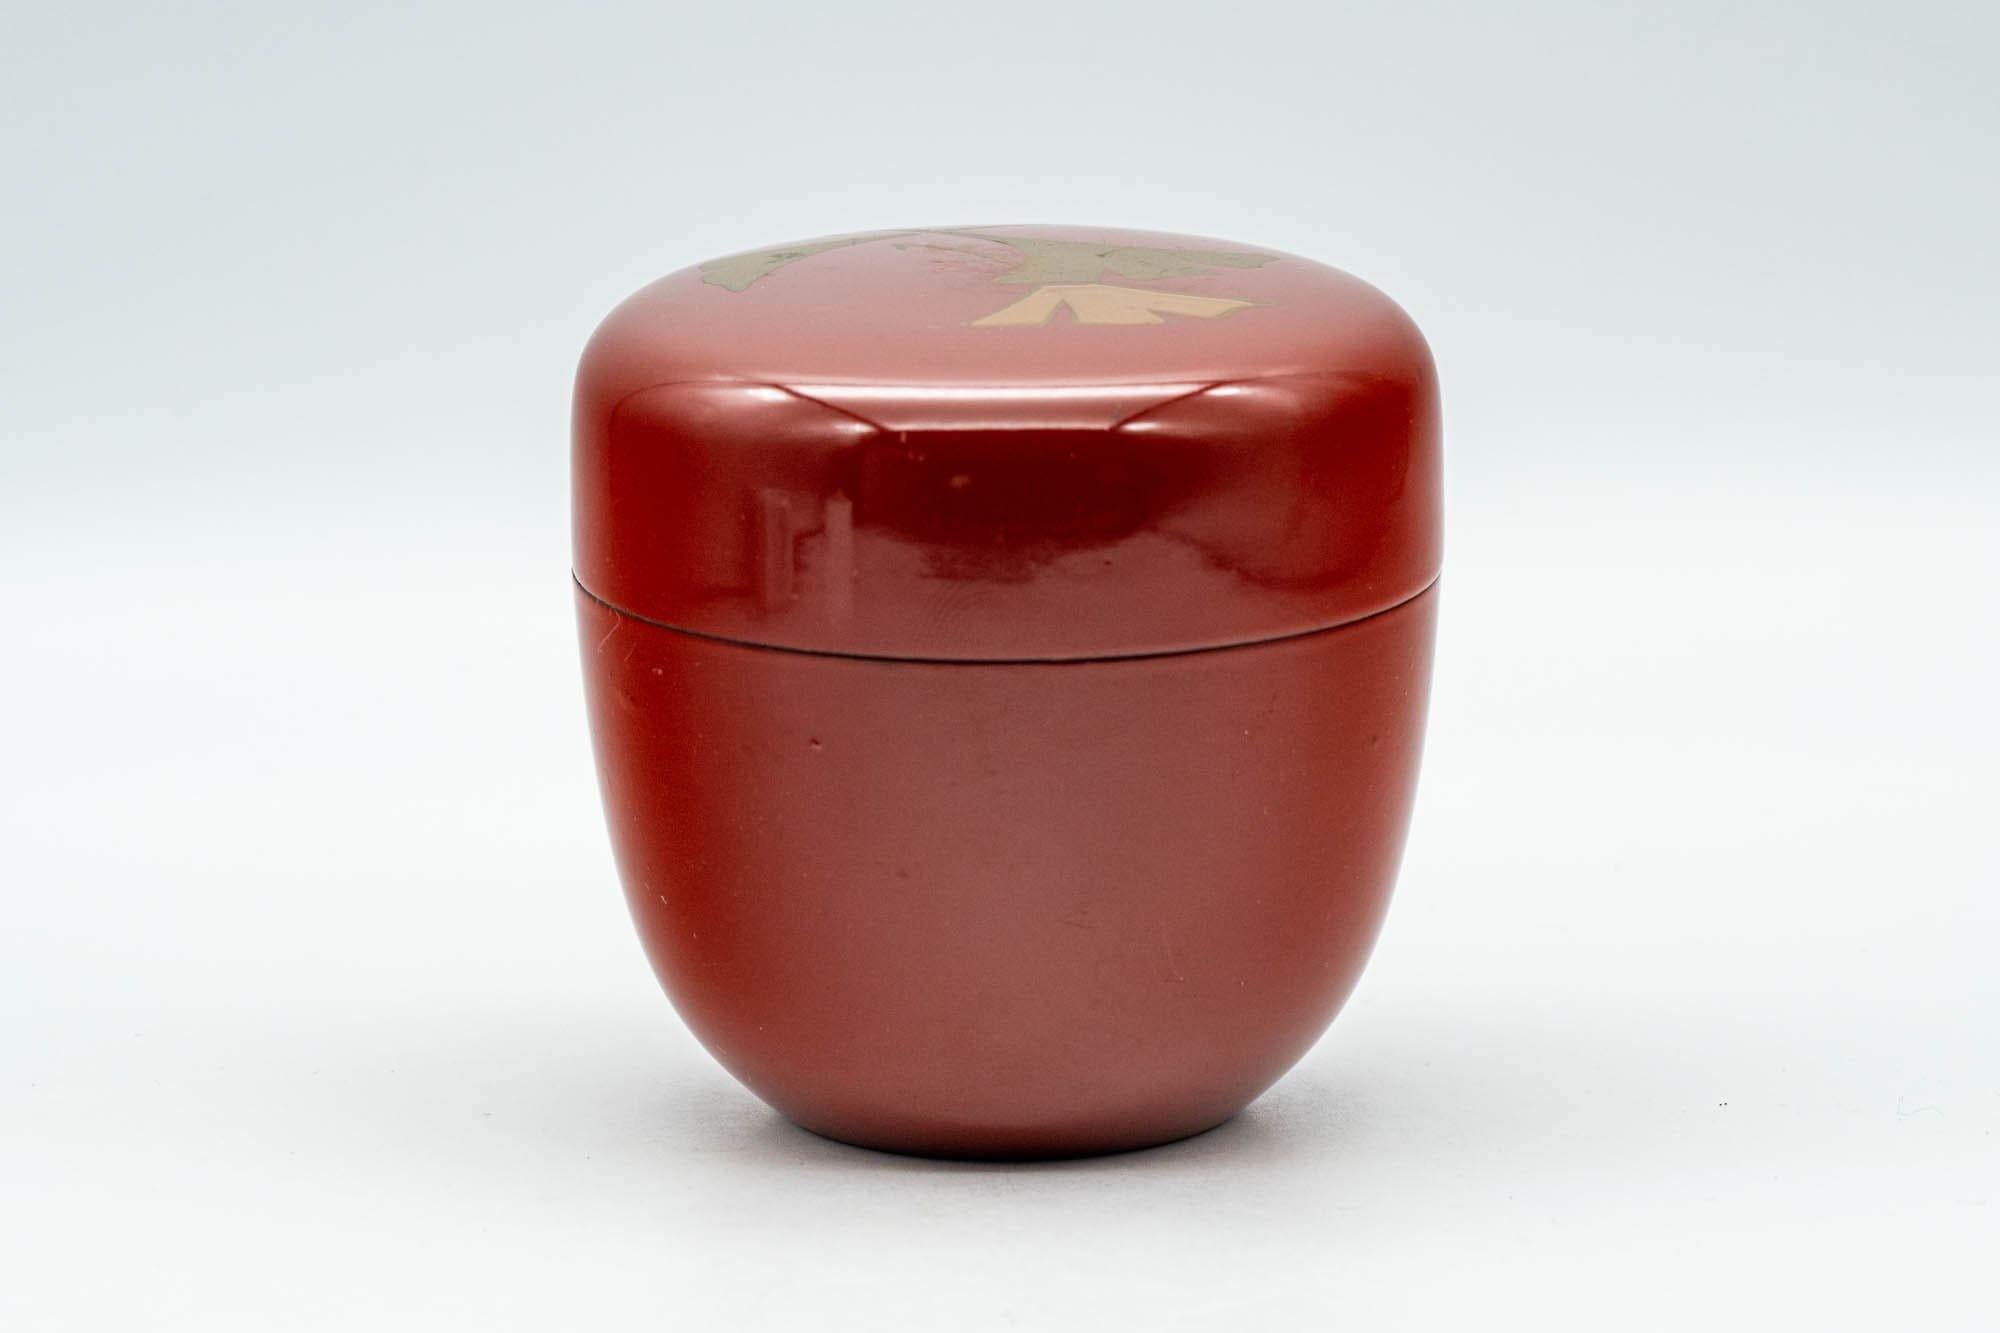 Japanese Natsume - Ginkgo Leaves Red Lacquer Matcha Tea Caddy - 100ml - Tezumi